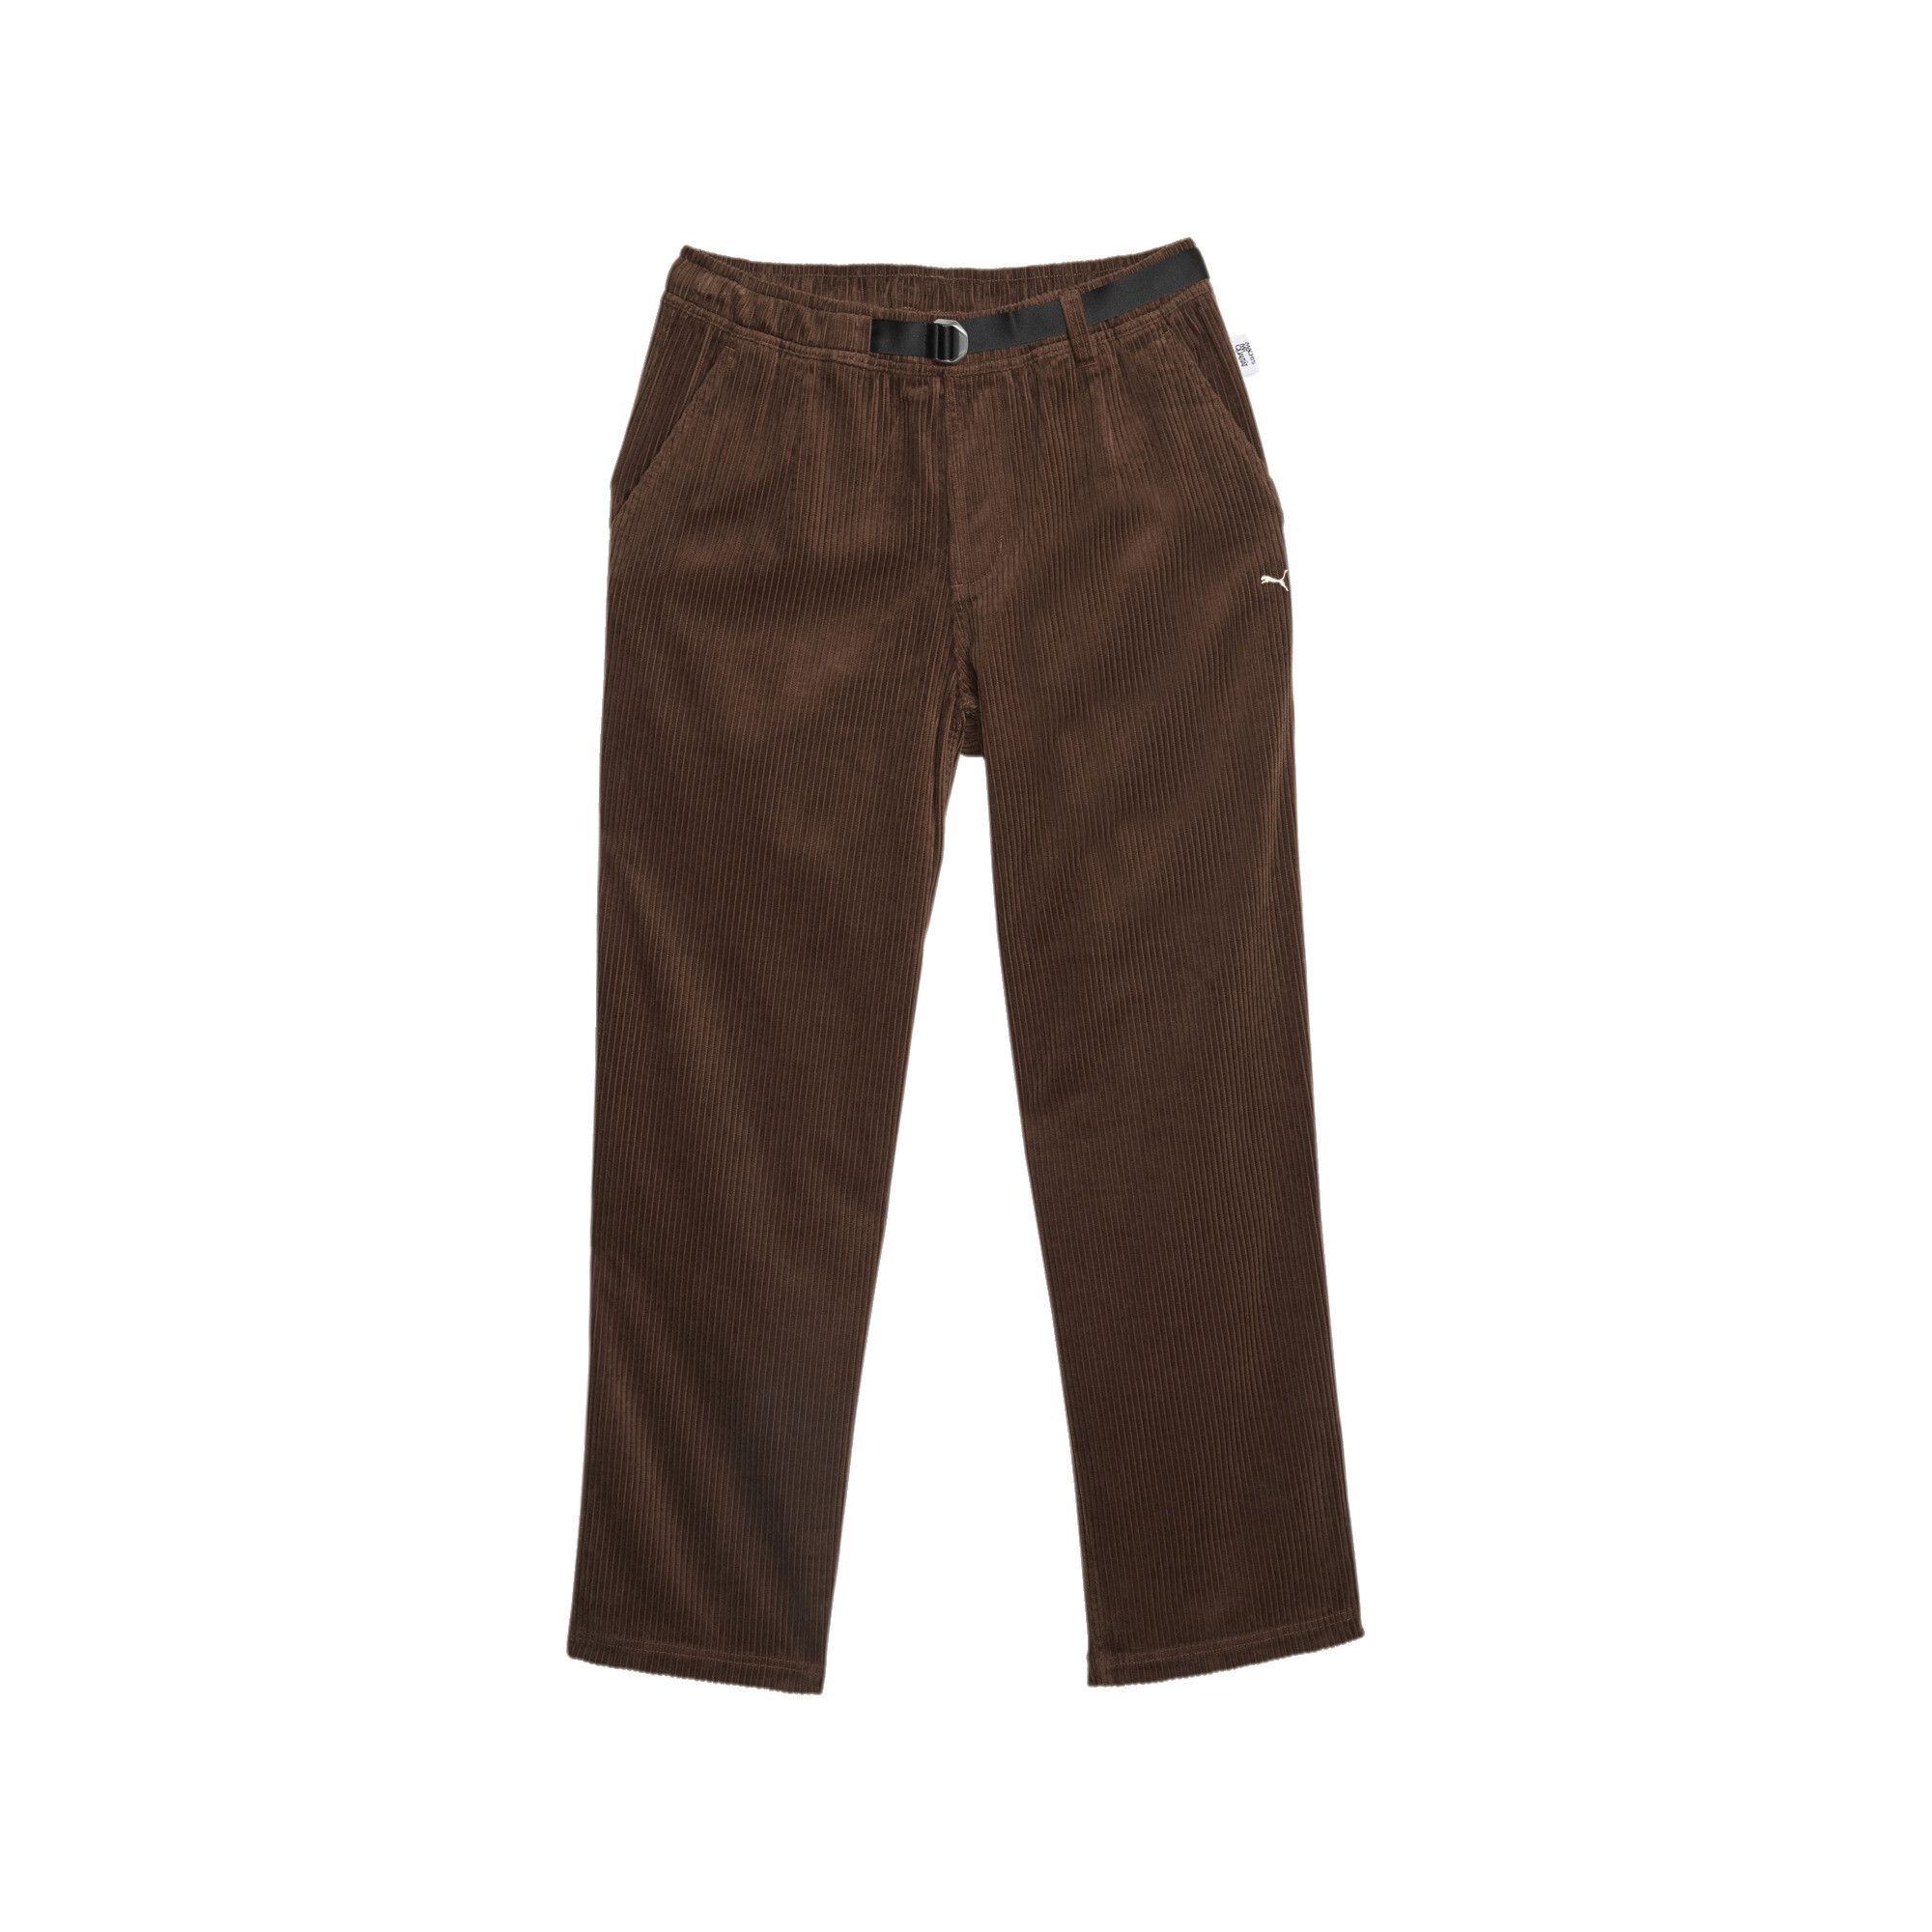 Men's PUMA MMQ Corduroy Pants In Brown, Size Small